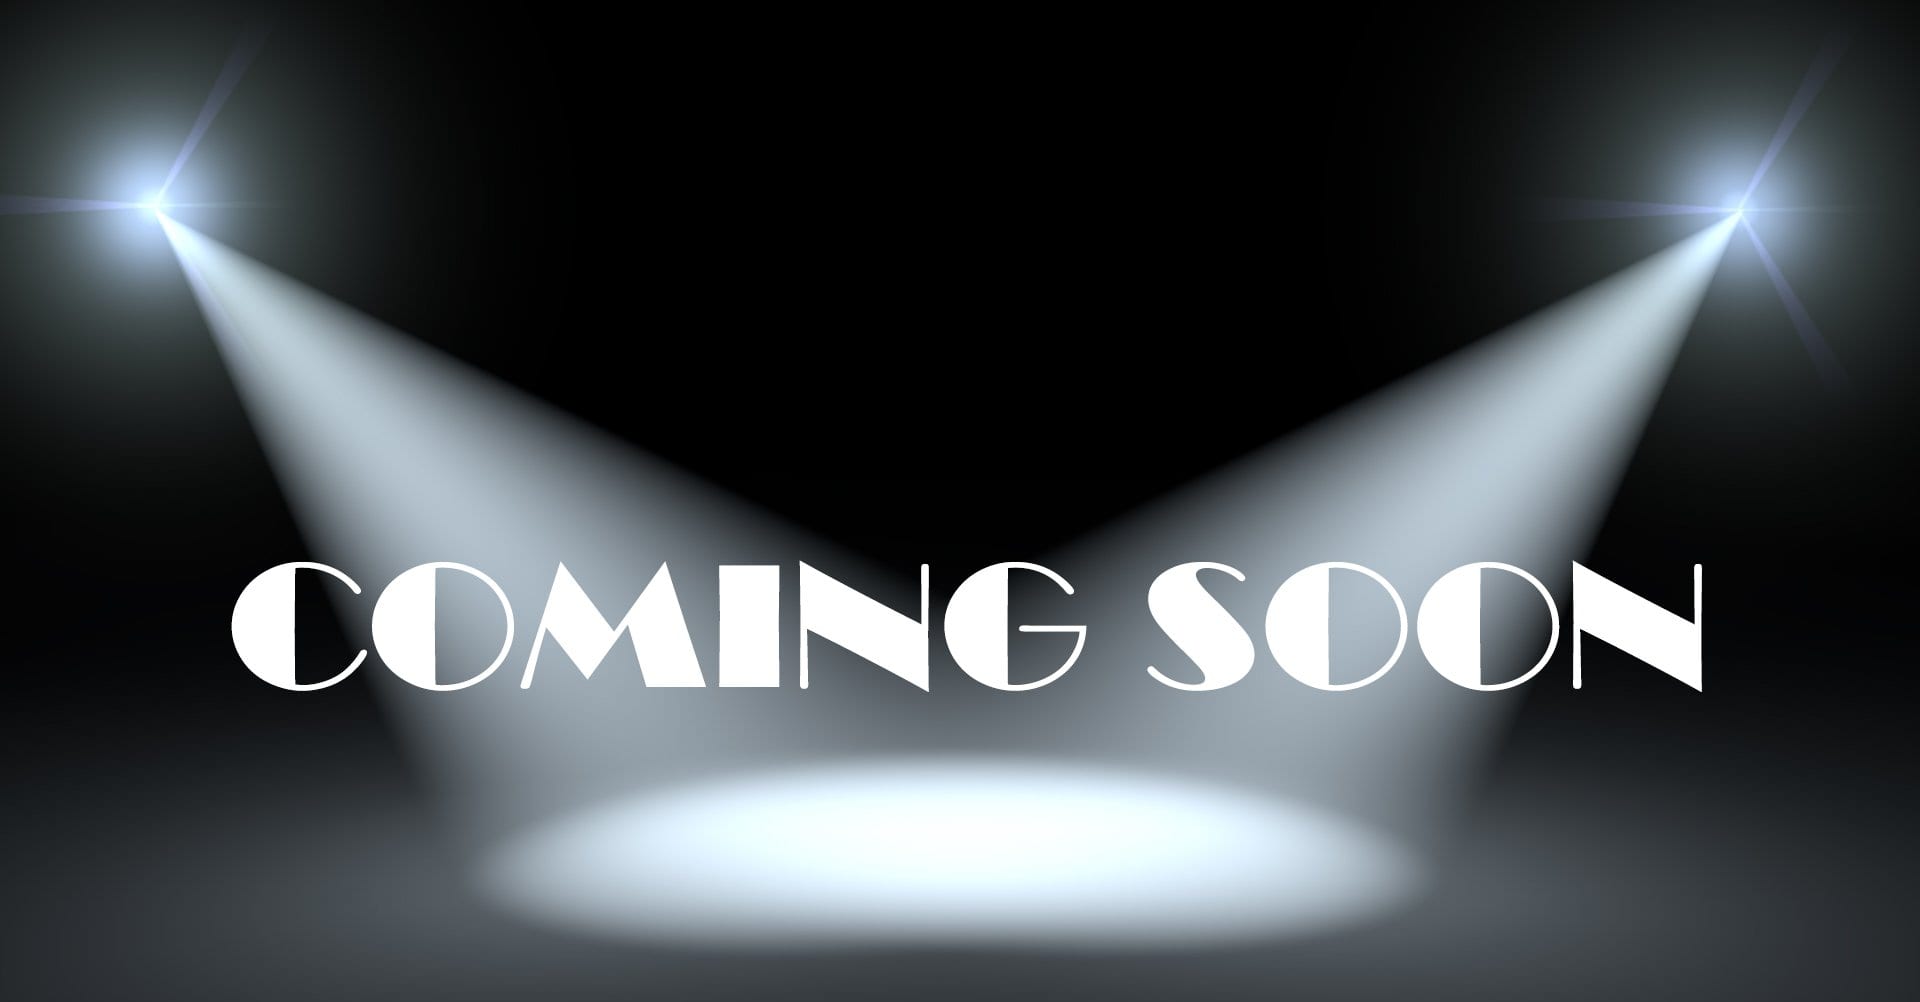 image of text "coming Soon"